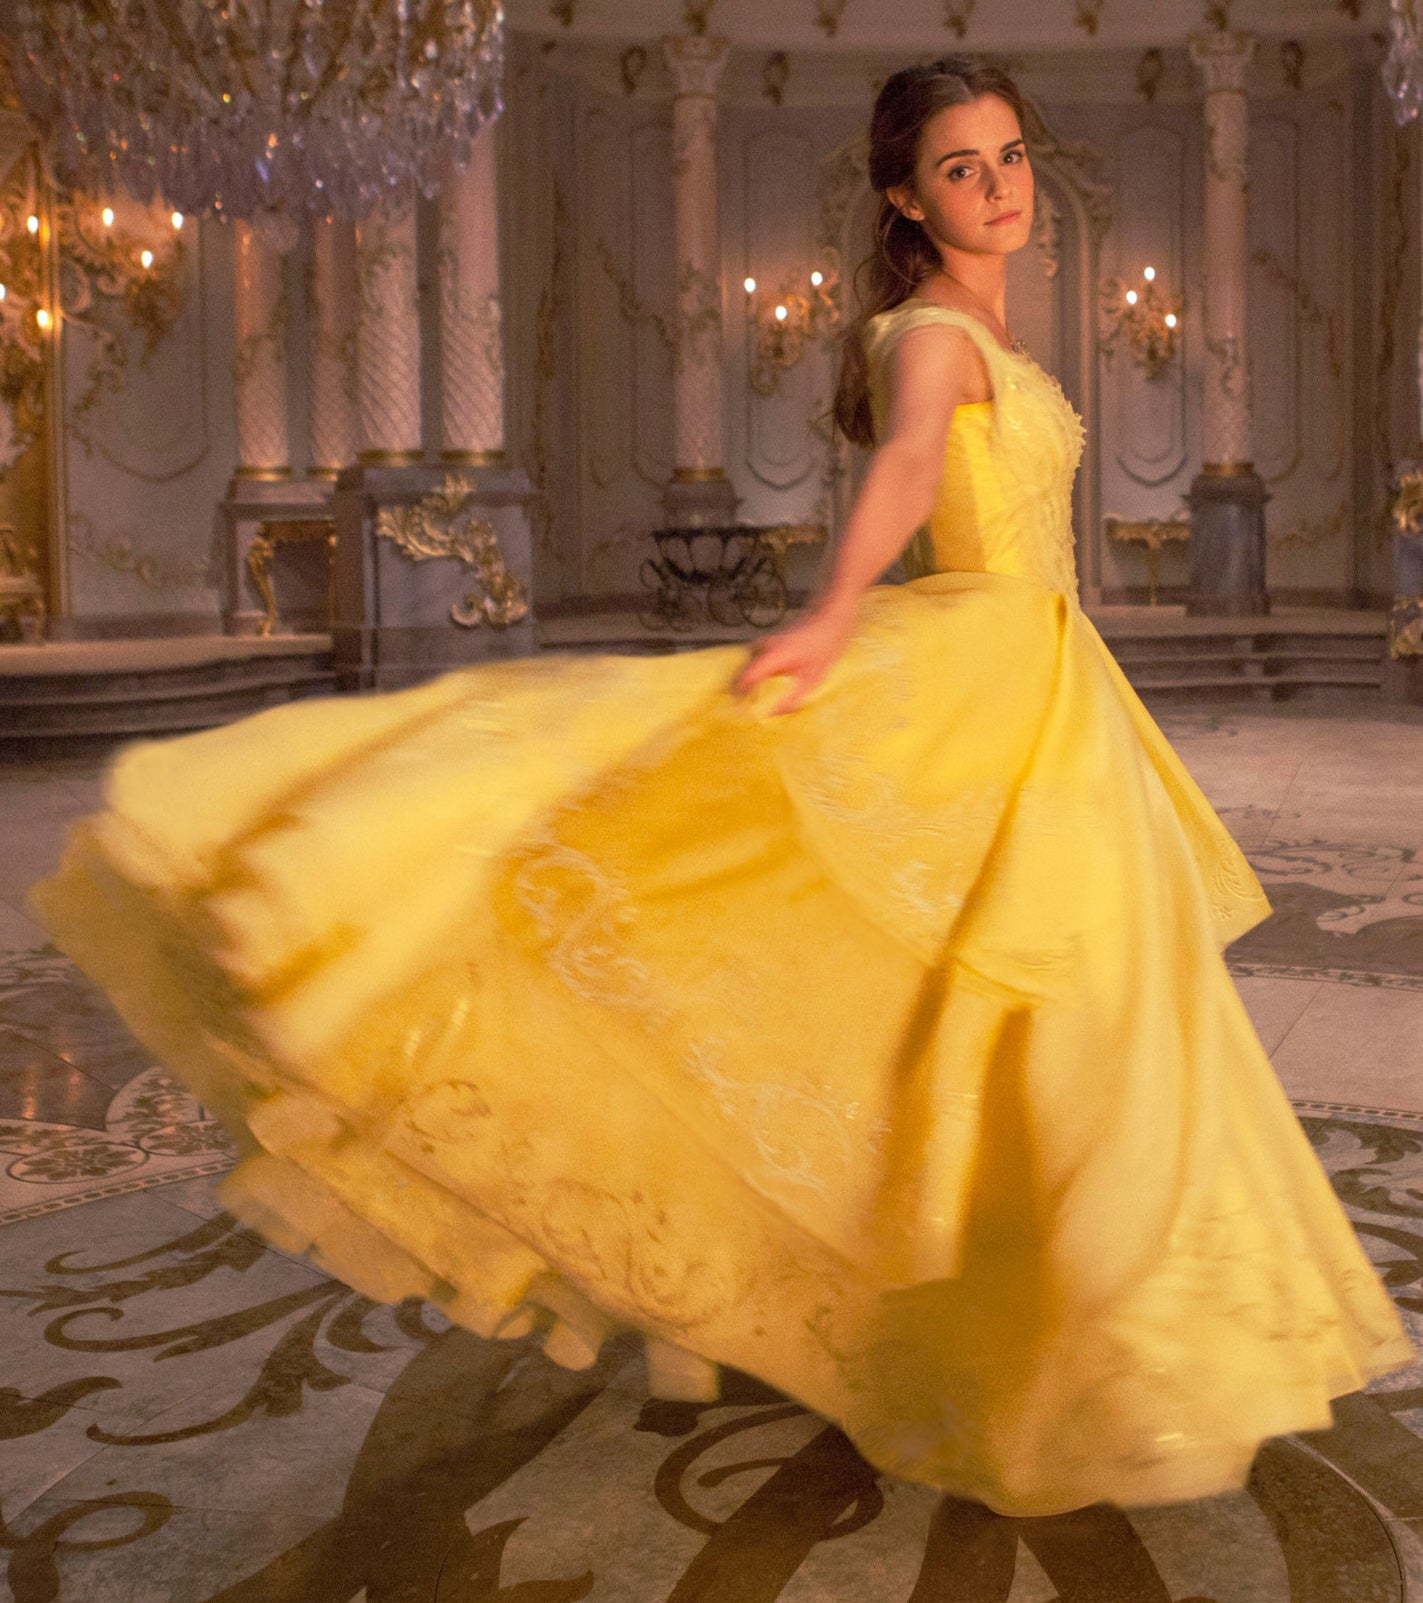 emma dancing in a gown